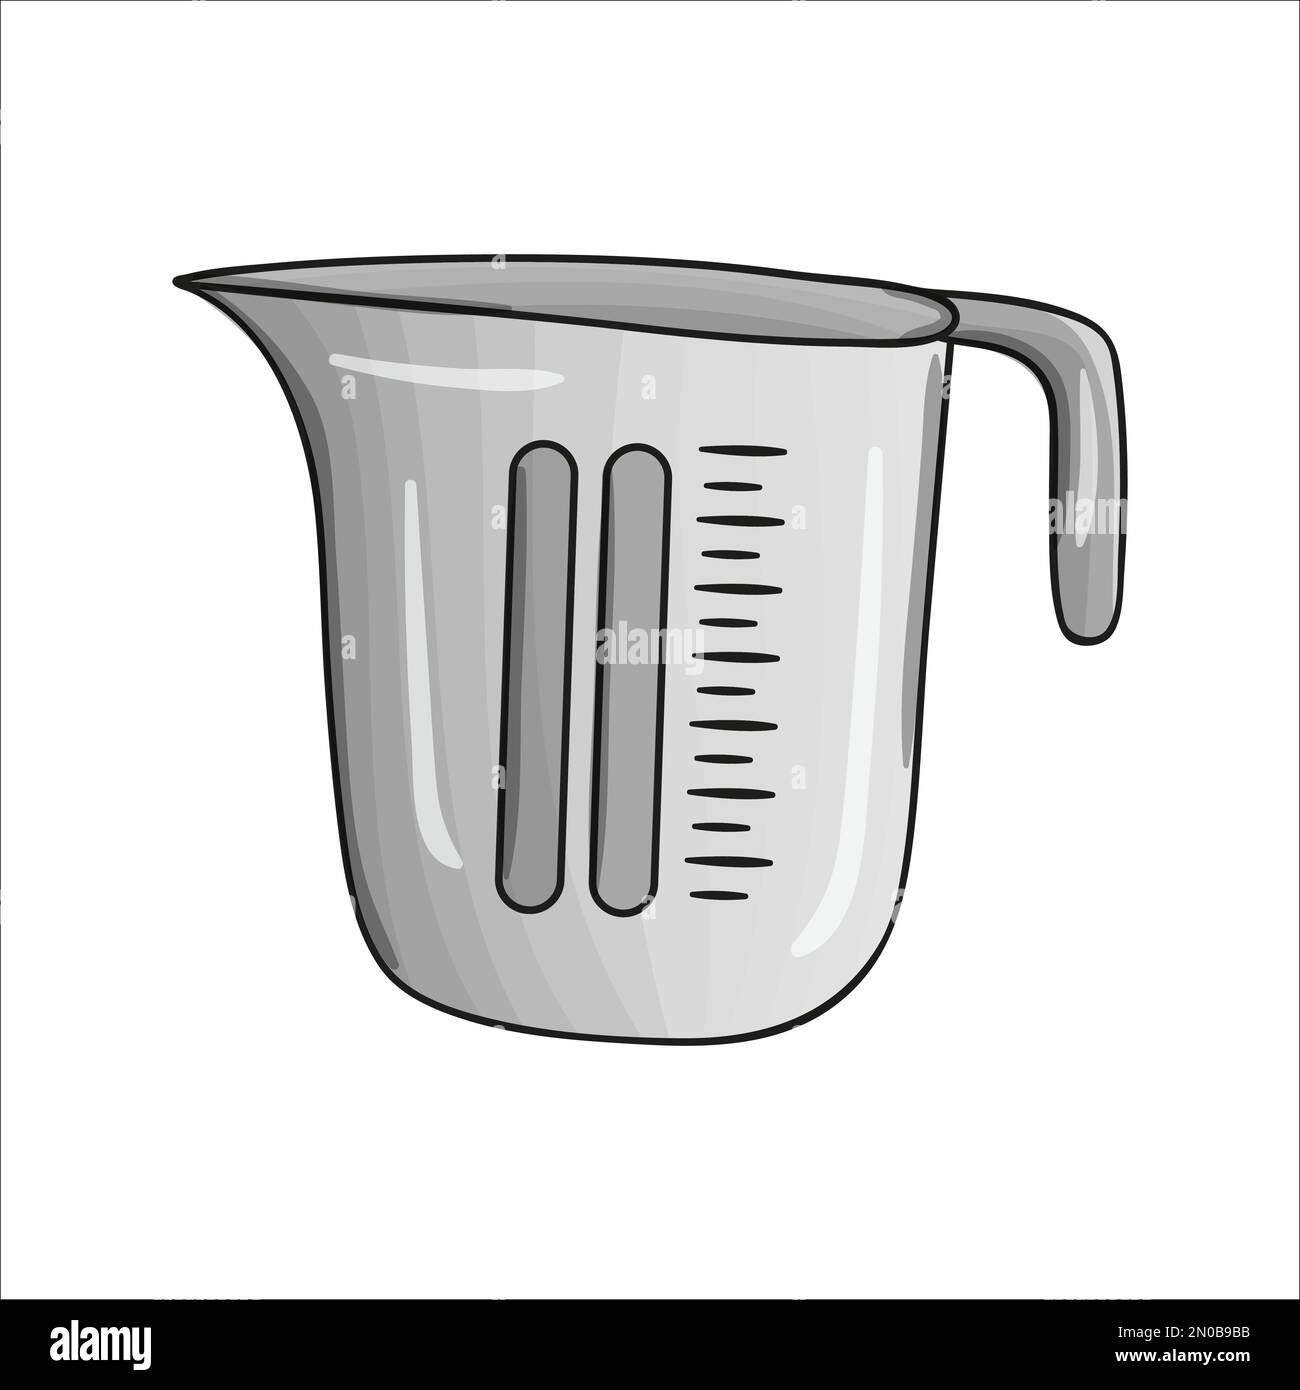 https://c8.alamy.com/comp/2N0B9BB/vector-colored-measuring-cup-kitchen-tool-icon-isolated-on-white-background-cartoon-style-cooking-equipment-crockery-vector-illustration-2N0B9BB.jpg